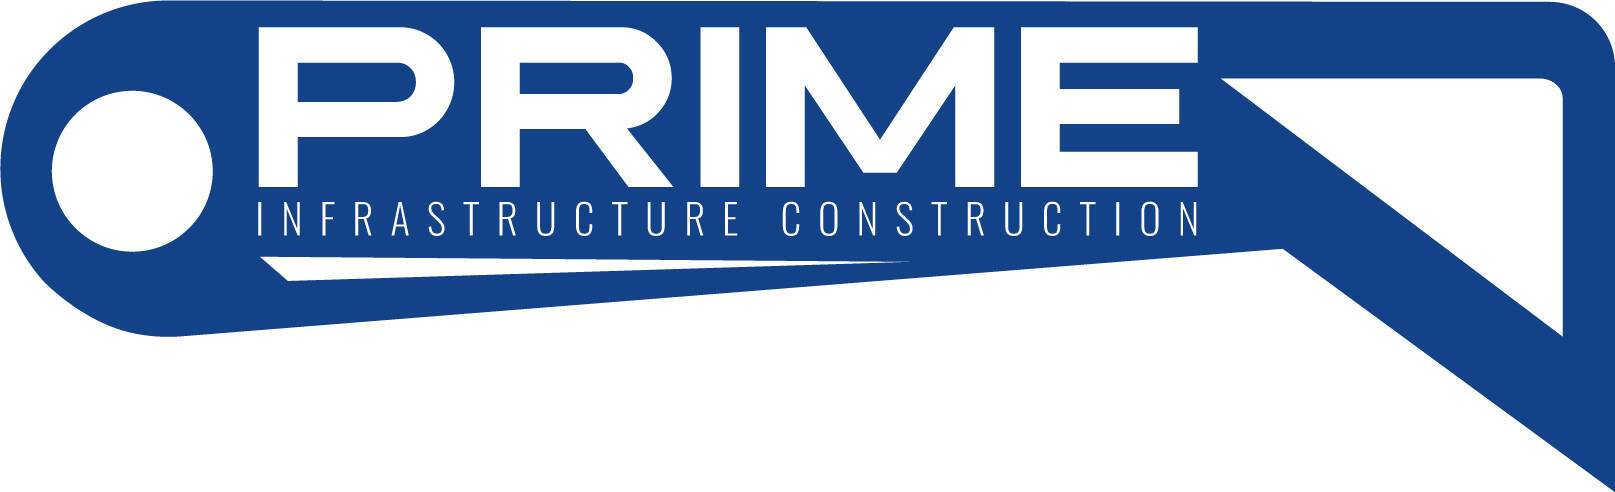 Prime Infrastructure Construction